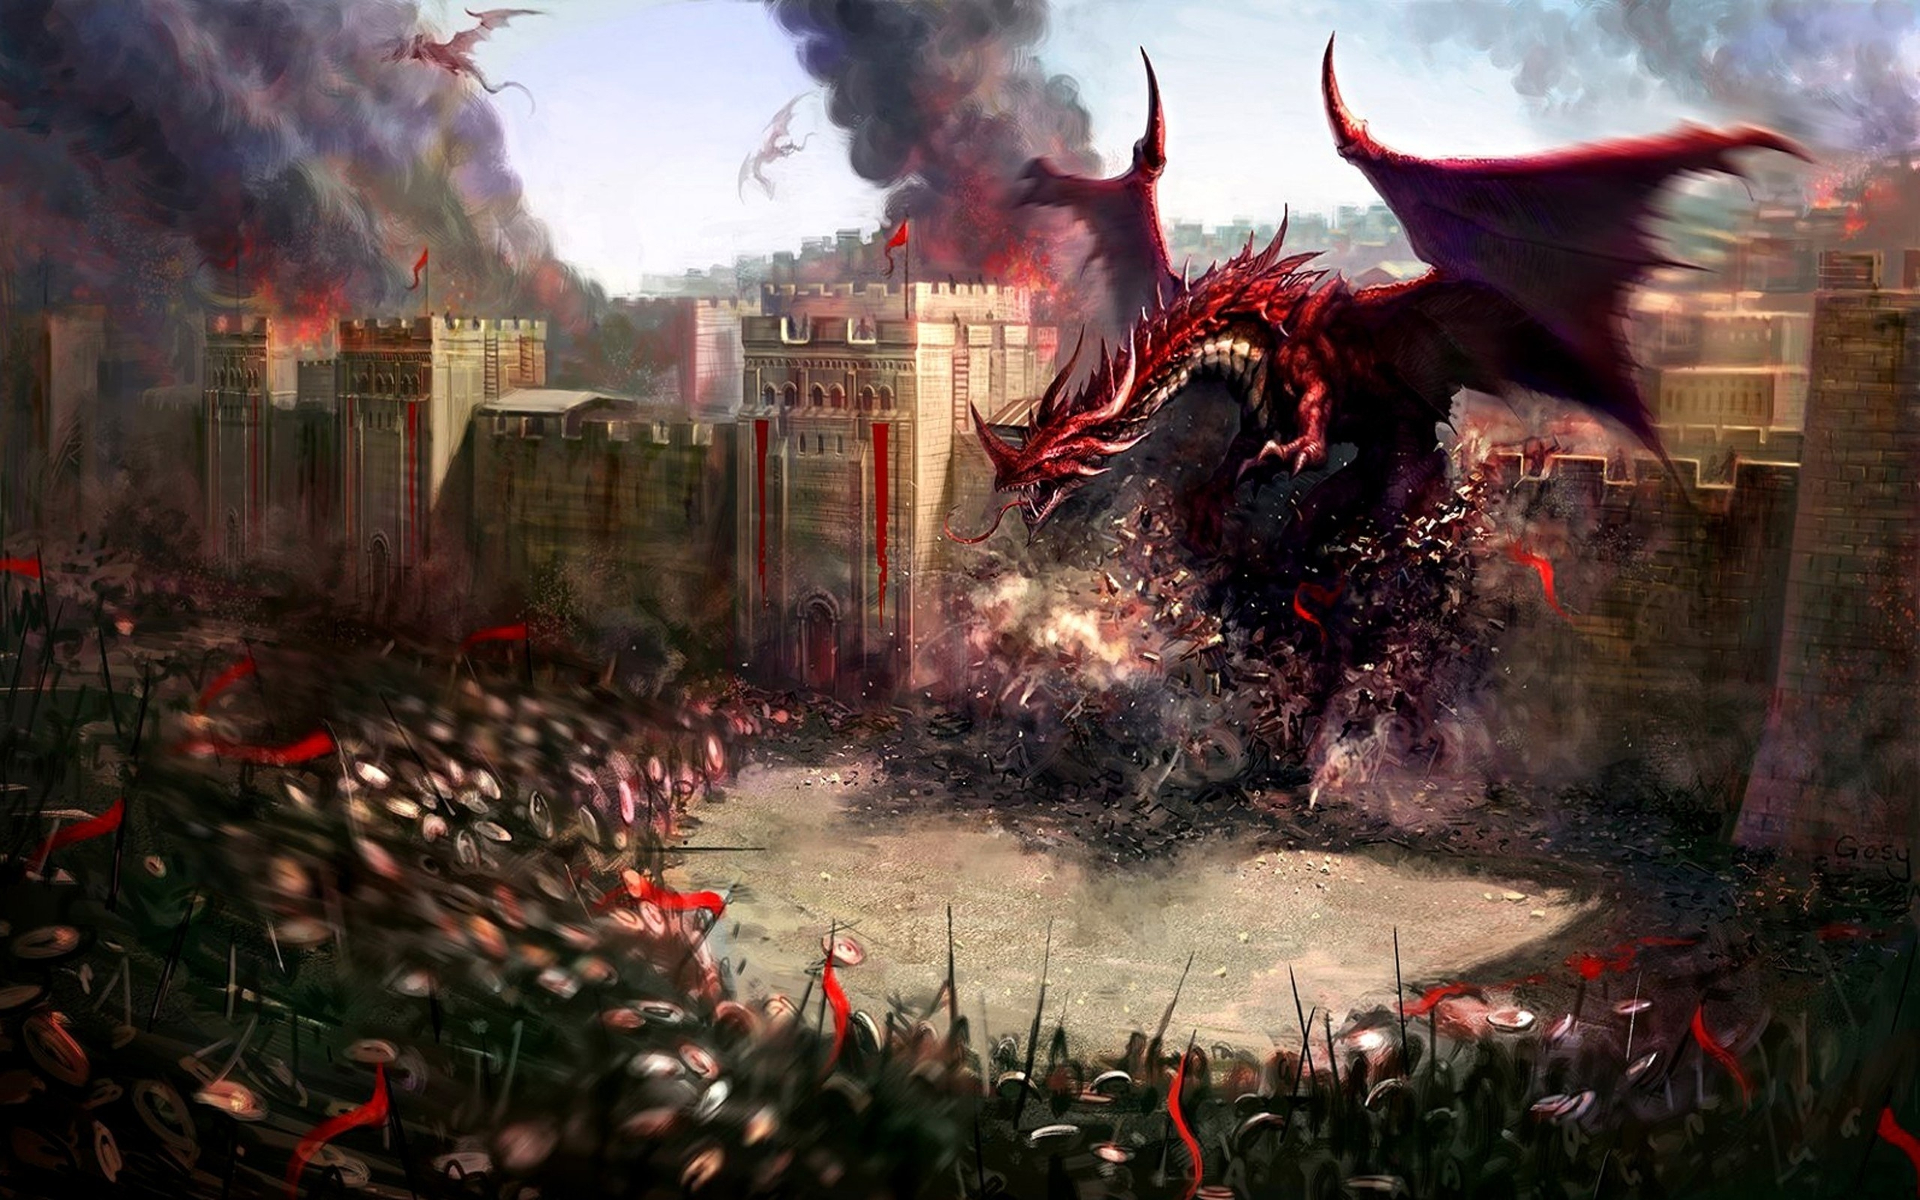 Attack of the Red Dragon